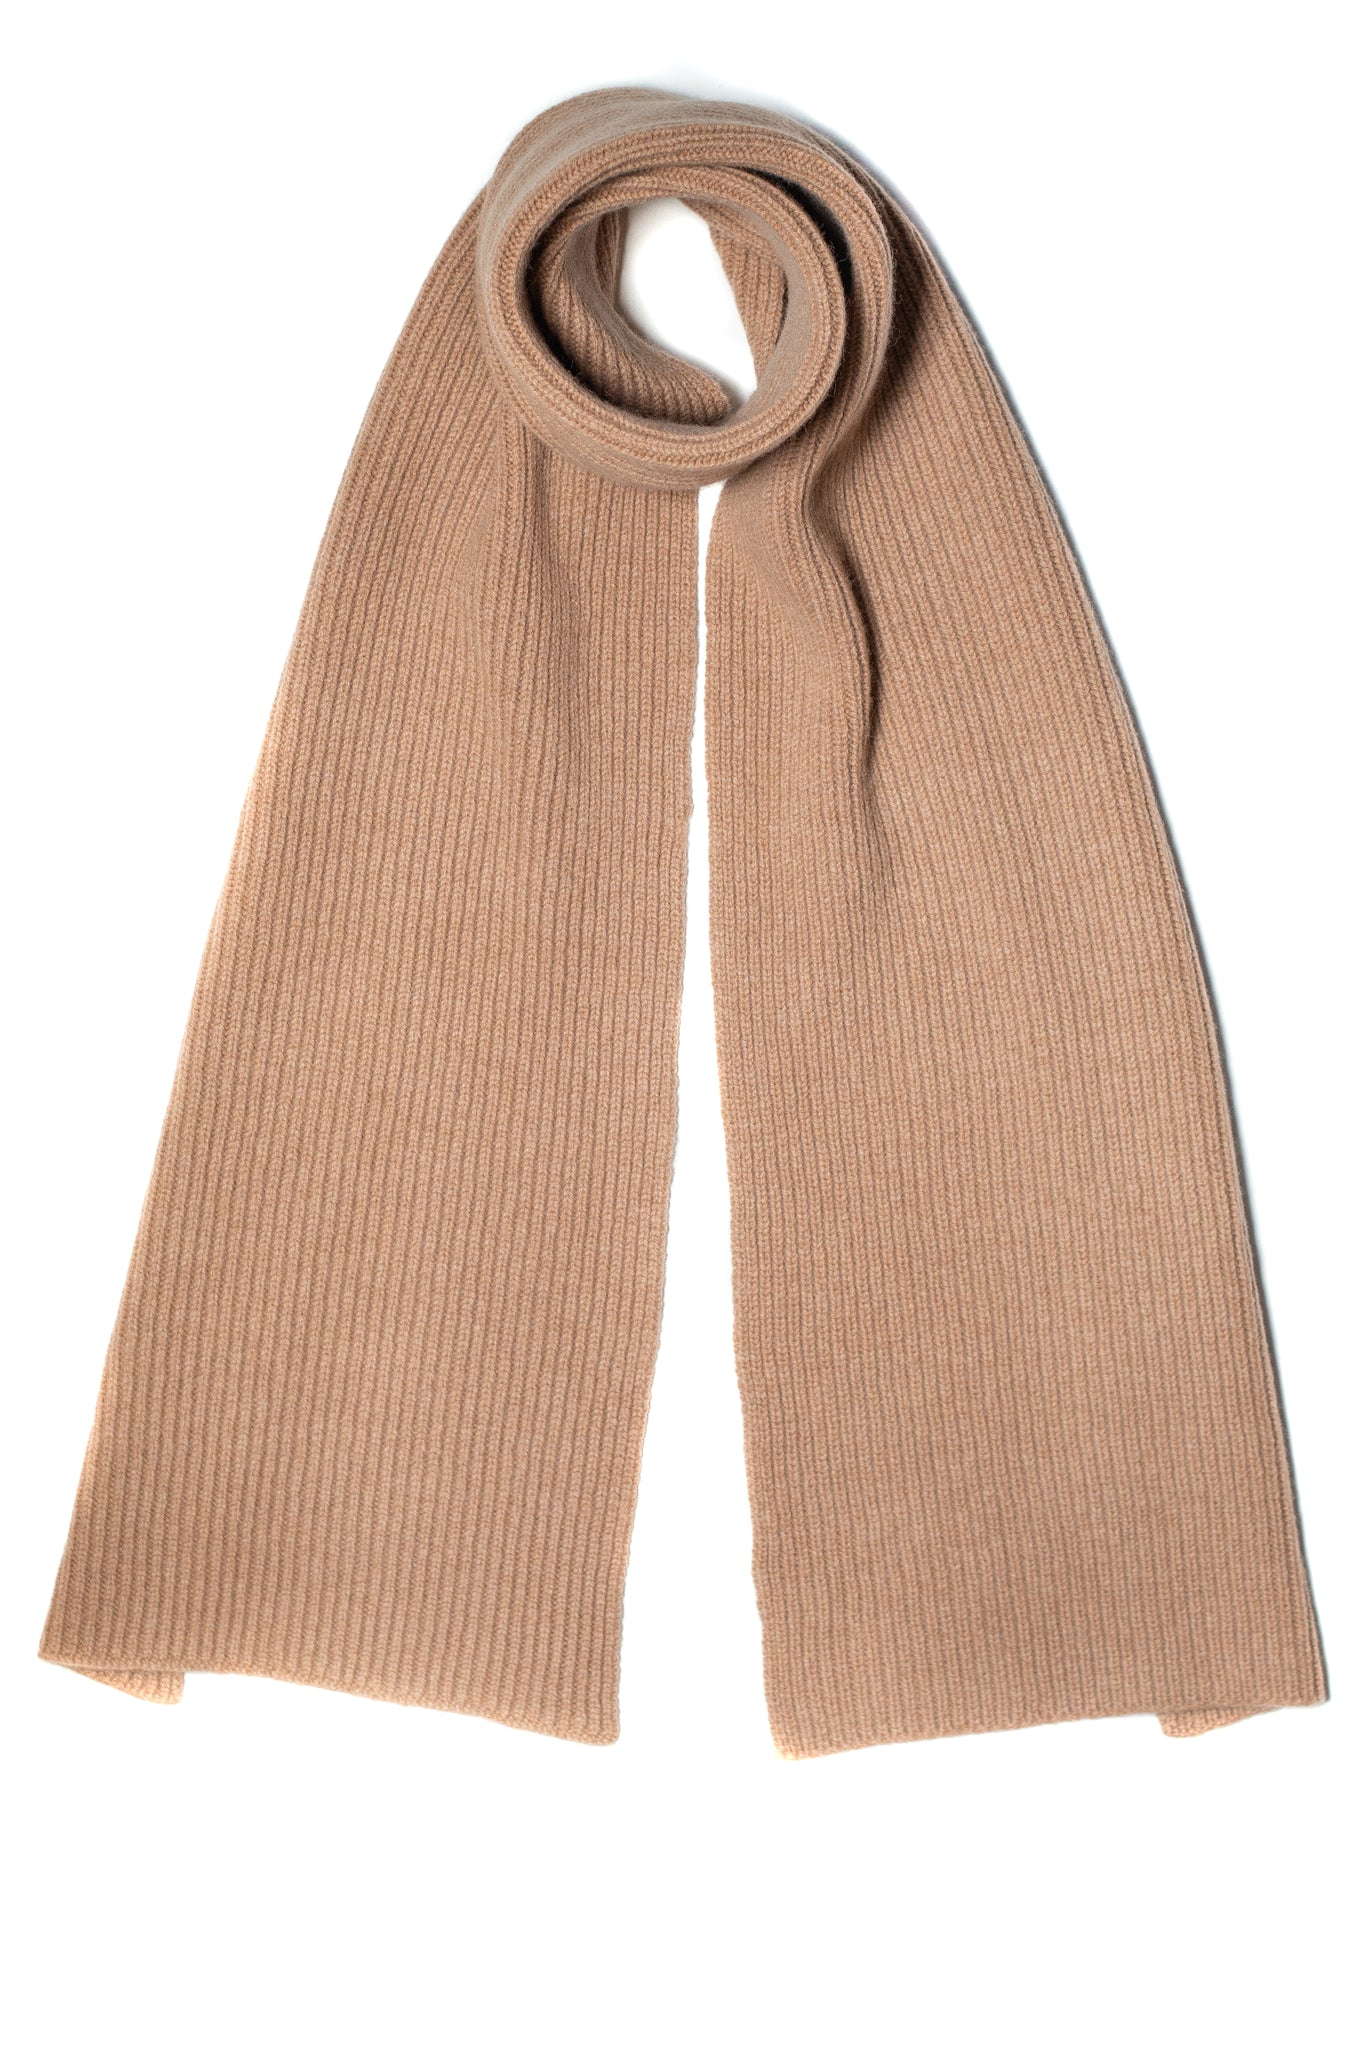 LAMBSWOOL RIBBED SCARF CAMEL